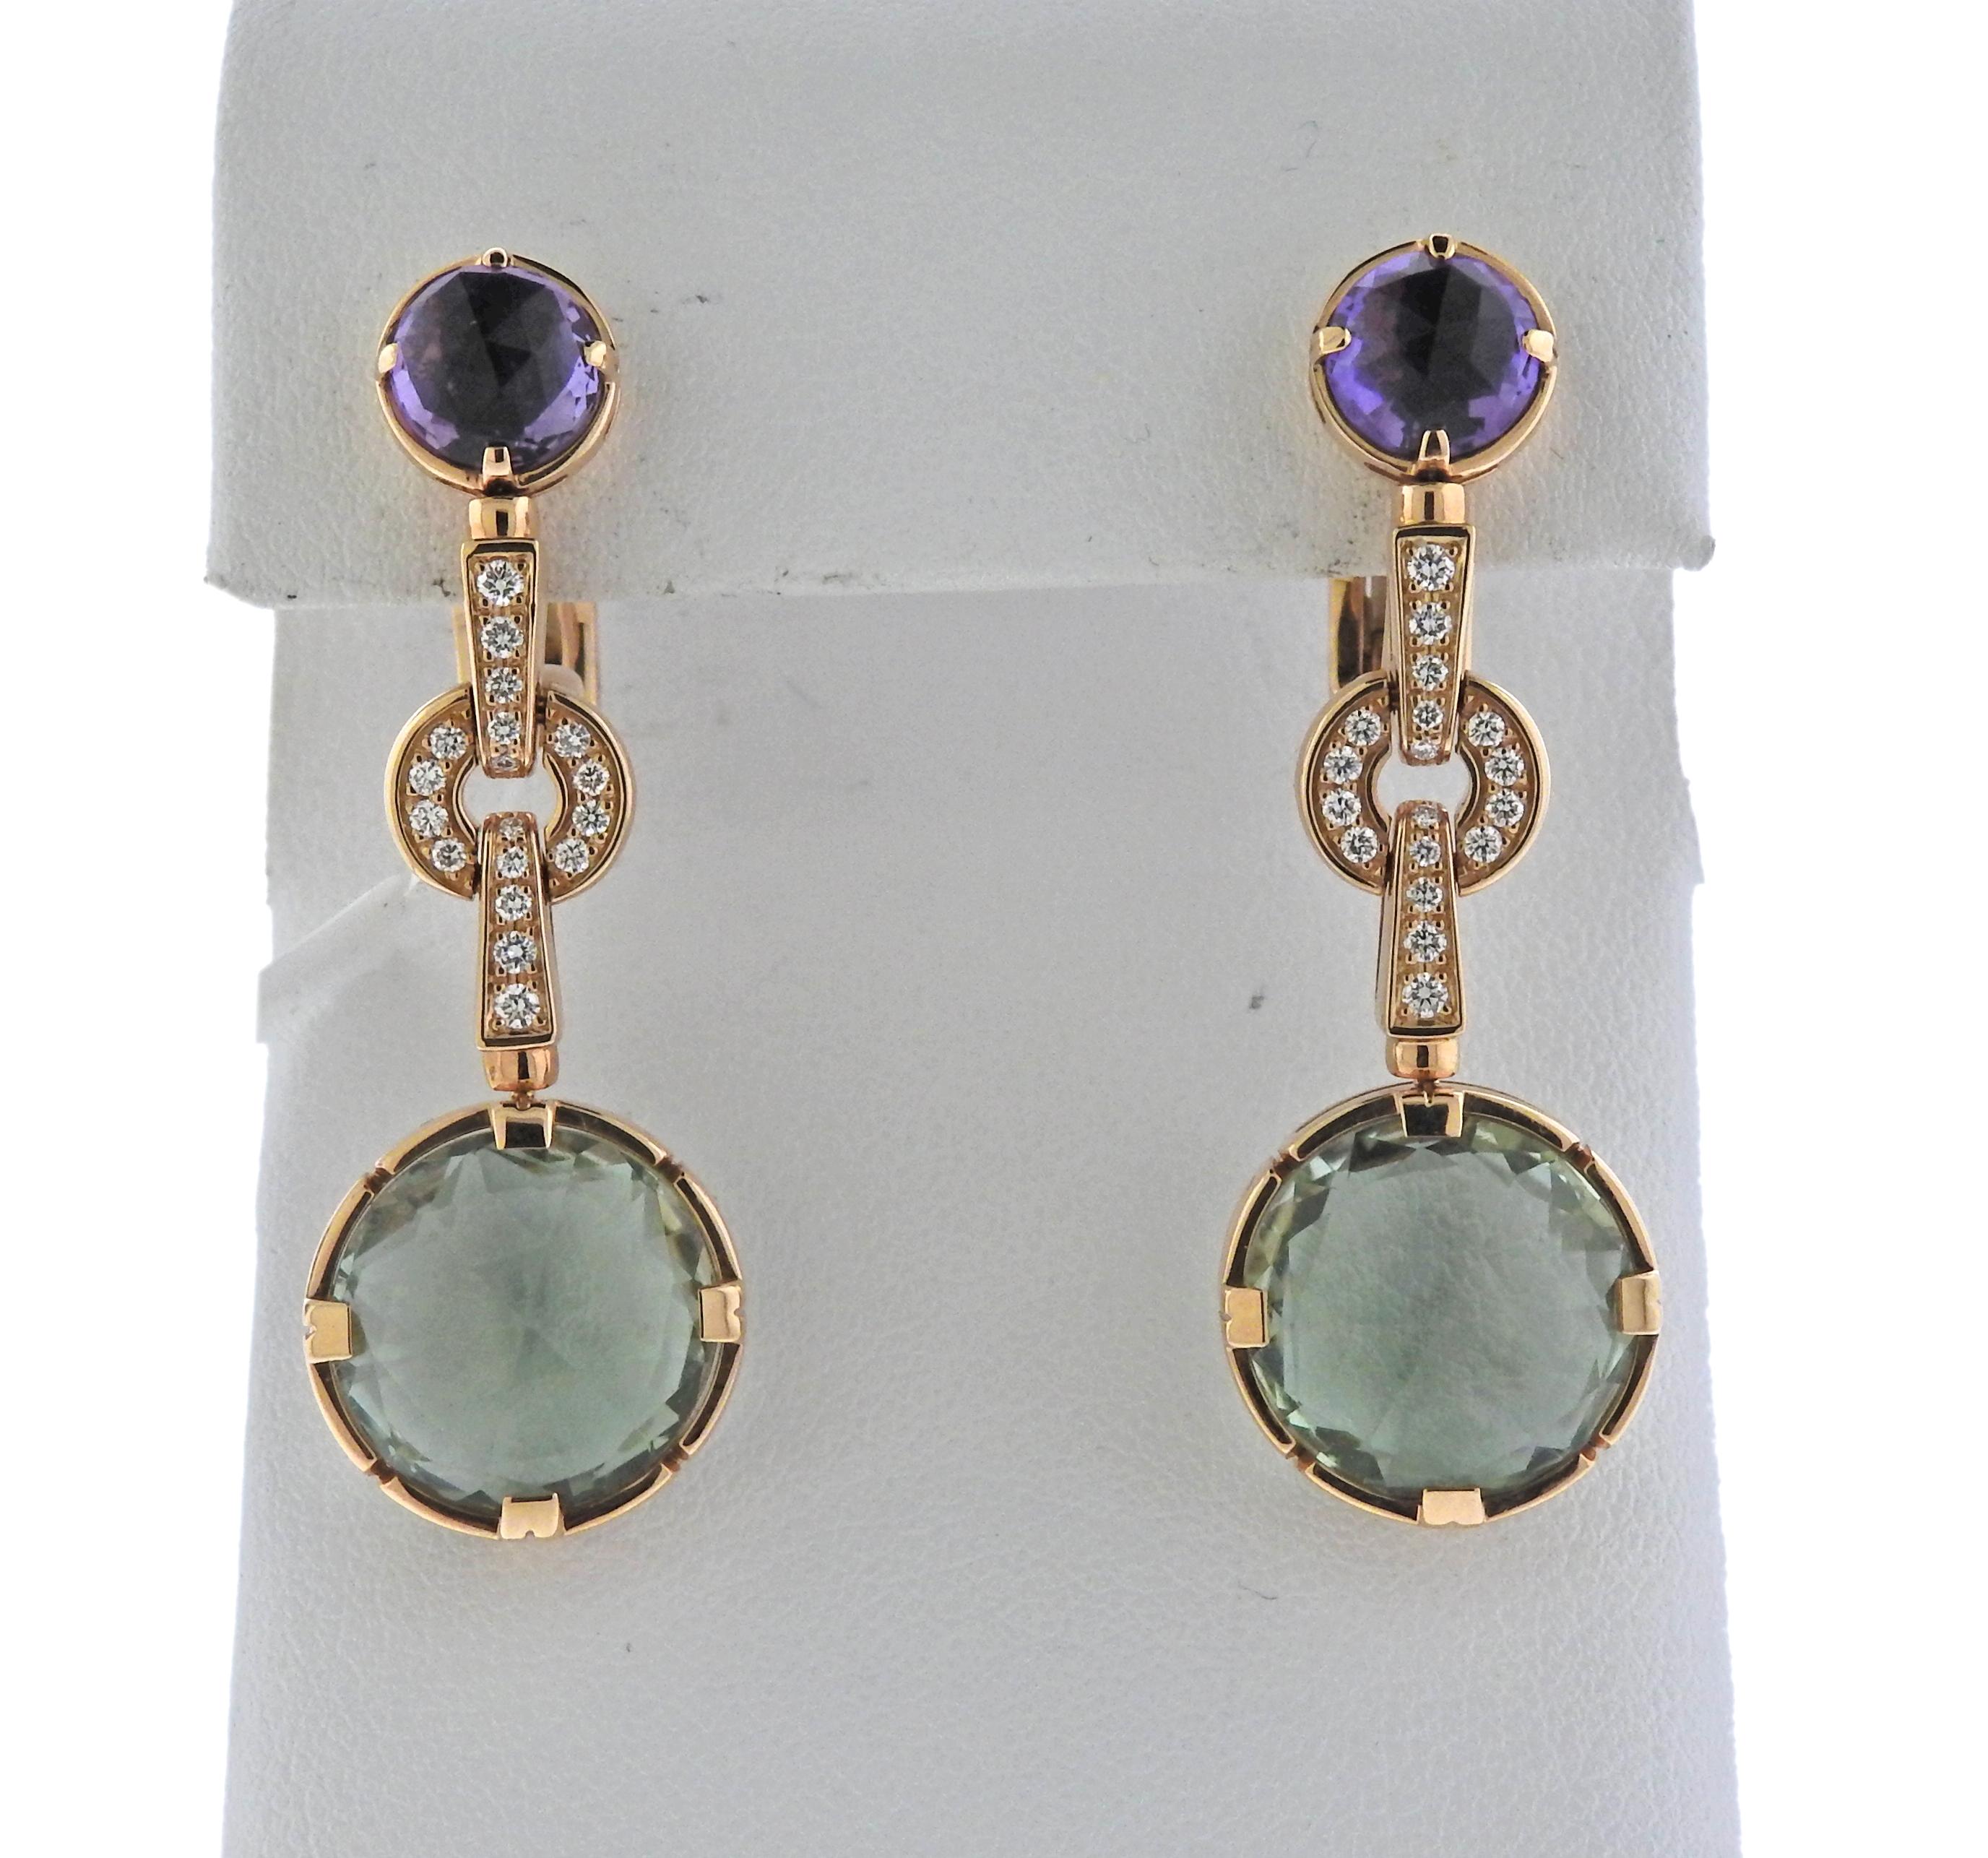 Pair of 18k yellow gold Bulgari earrings, crafted for Parentesi collection, set with approx. 0.31ctw in G/VS diamonds, green quartz and amethysts. Brand new, store sample. Earrings are 43mm x 15mm, weigh 19.8 grams. Marked:  Bvlgari, 750, Italian